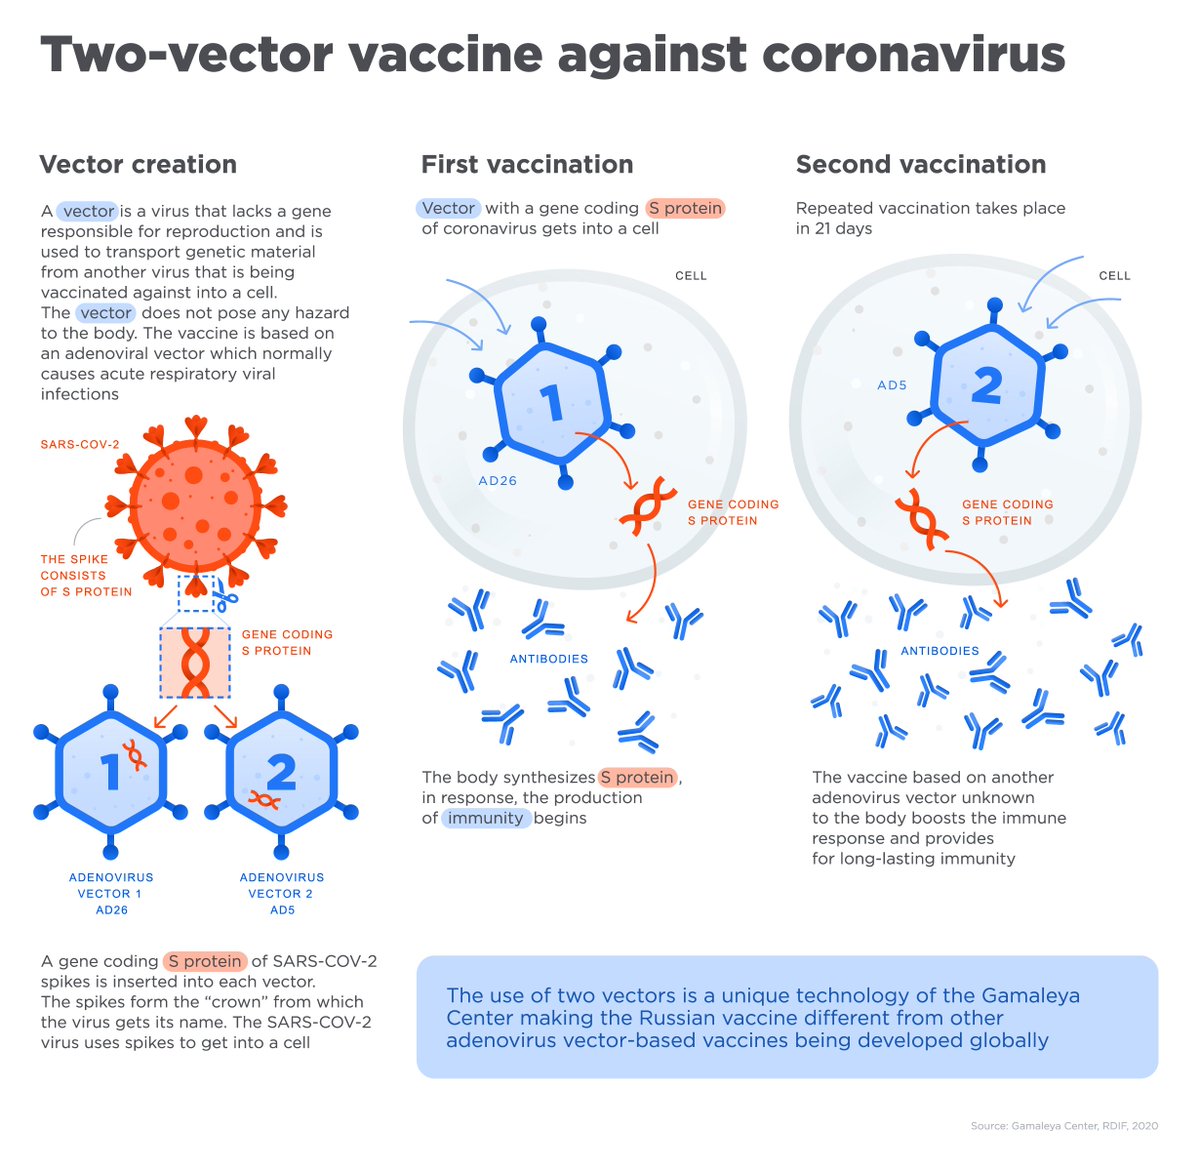 Hence the utility of a heterologous dosing regimen. The Sputnik V vaccine uses two different Ad-vectored vaccines, Ad26 and Ad5 (see below). Any antibodies targeting the prime Ad26 vector will not be effective against the Ad5 booster.